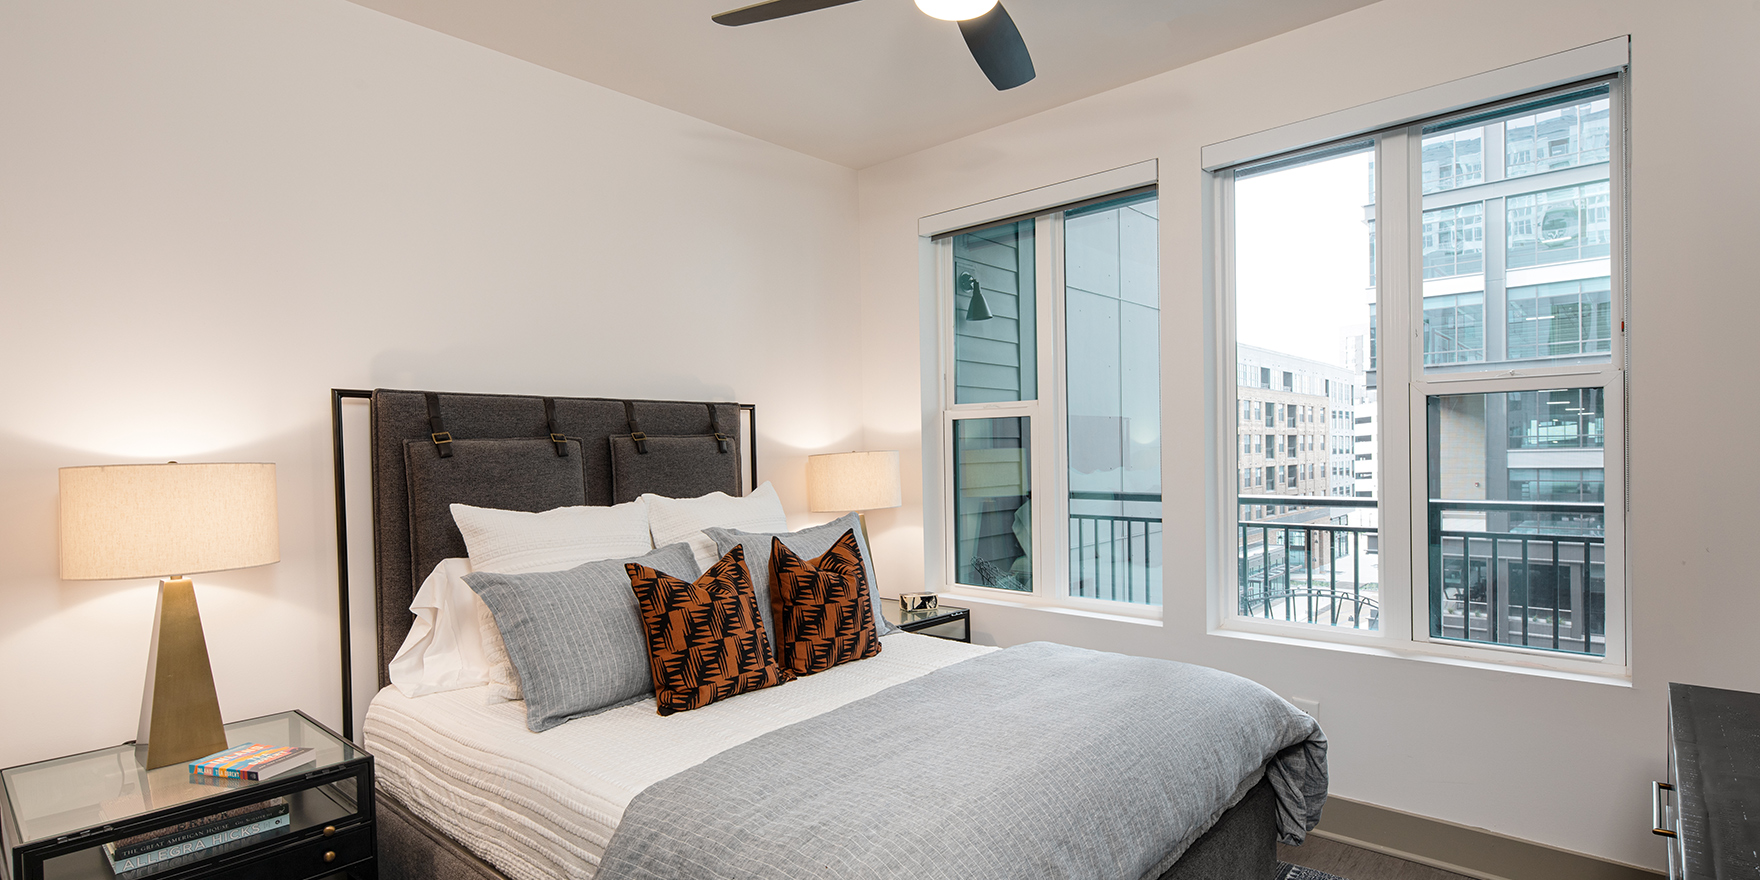 The Line one bedroom apartment bedroom with window view of surrounding city-scape